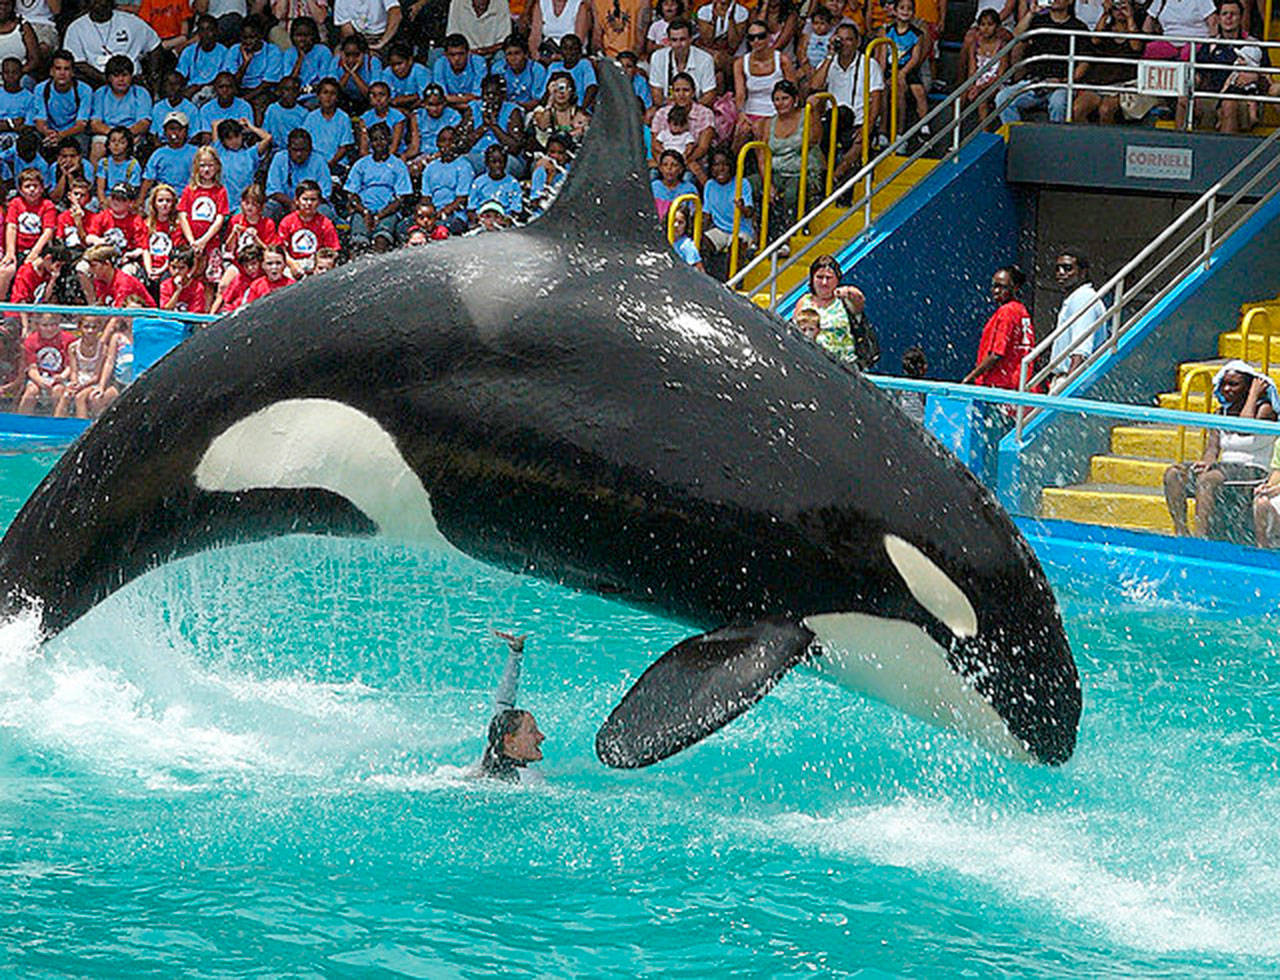 The killer whale known as Lolita at the Miami Seaquarium performs for a show. She’s lived there since 1970 after being captured in Penn Cove. Photo provided